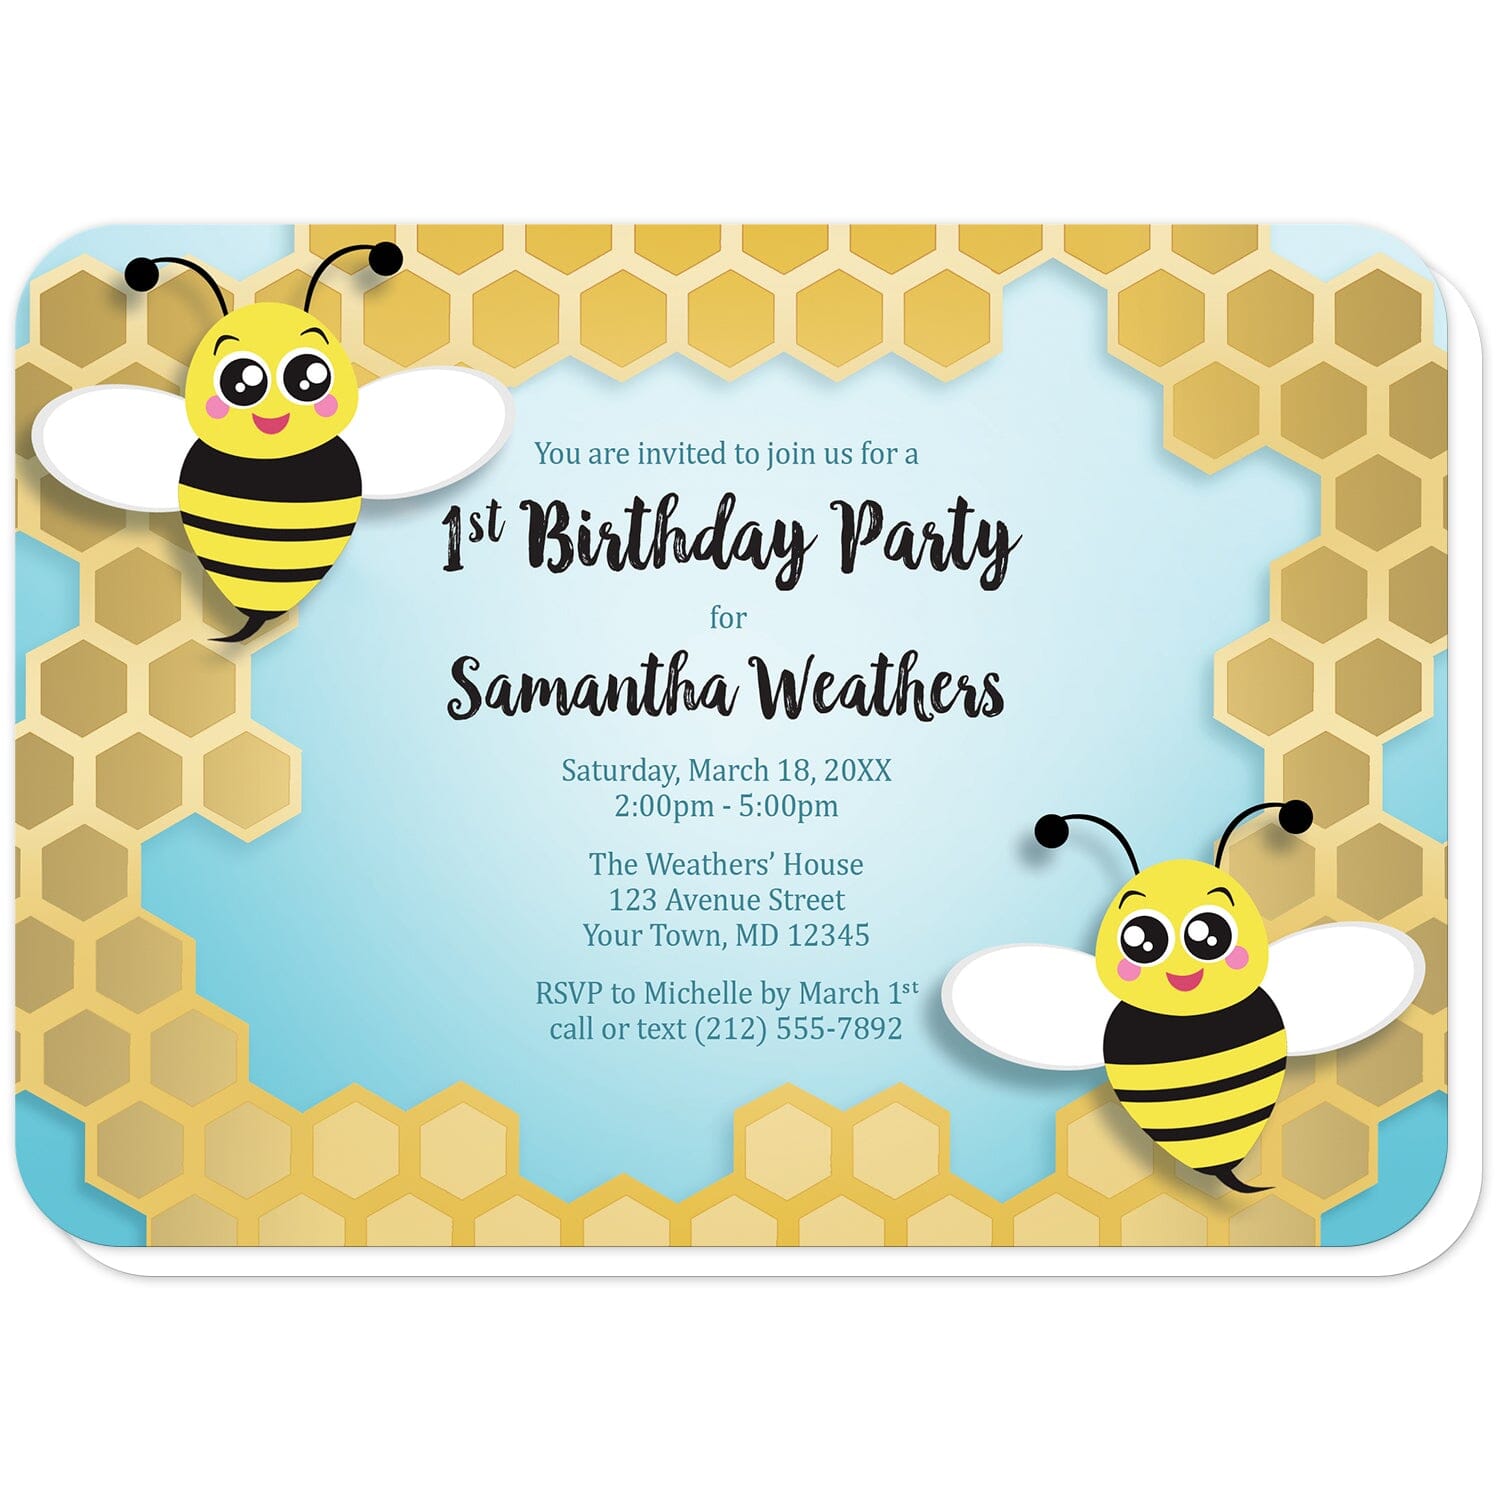 Cute Honeycomb Bee Birthday Party Invitations (with rounded corners) at Artistically Invited. Invites for a 1st birthday or other year or milestone that are illustrated with two cute bees on opposite corners over an irregular golden yellow honeycomb frame design over a turquoise gradient background. The personalized information you provide for your birthday party celebration will be custom printed in black and dark turquoise in the center over the background color.